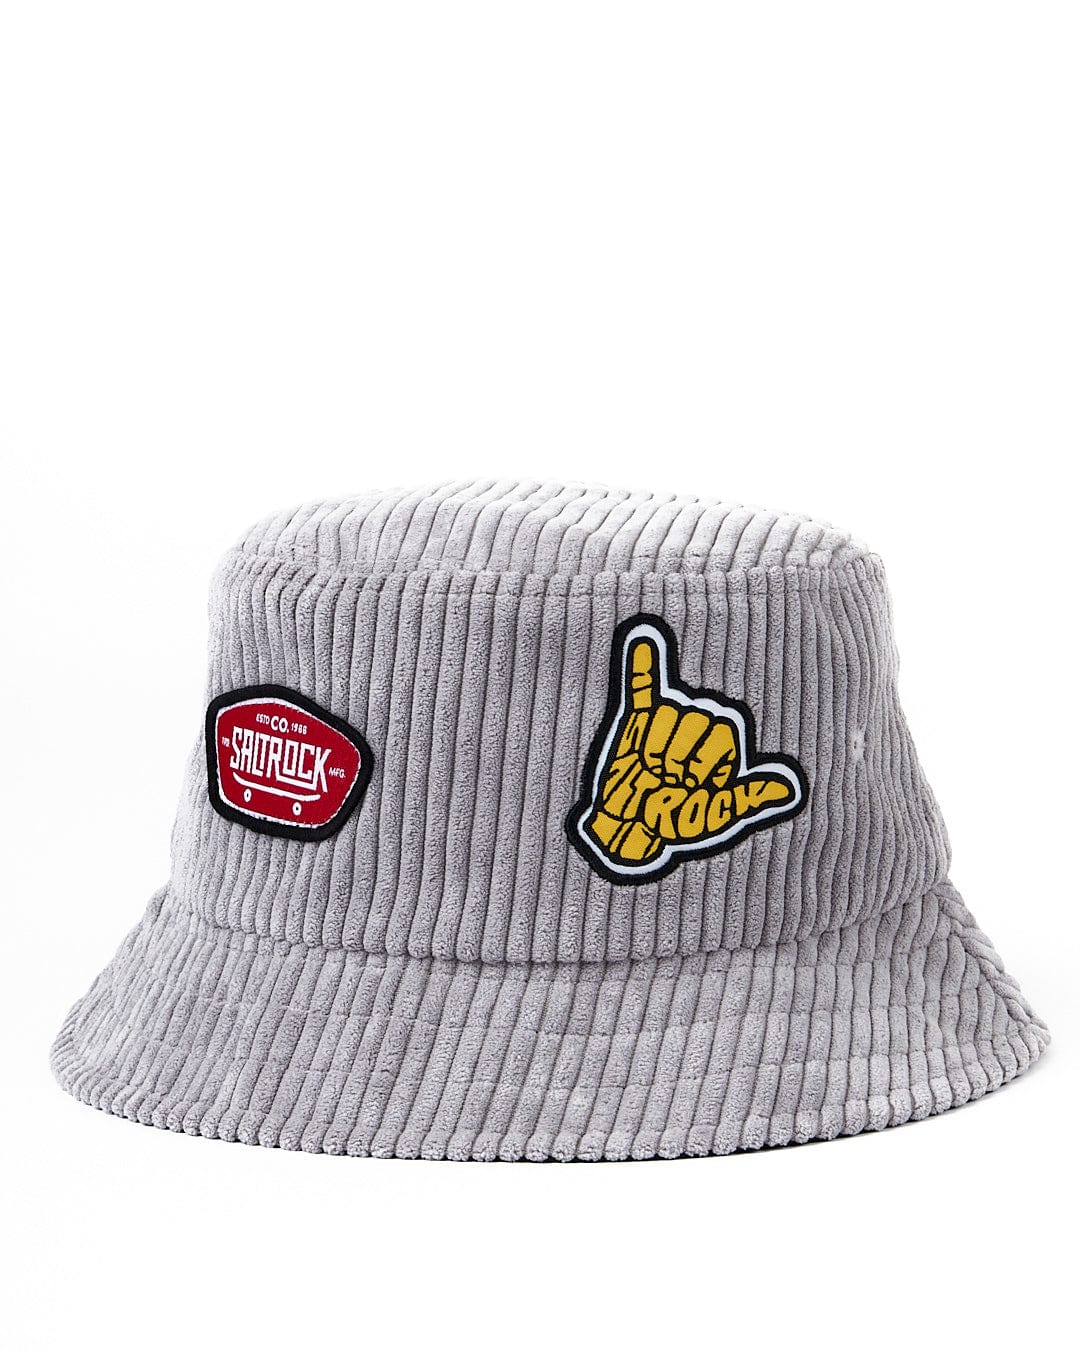 Scout - Kids Chunky Cord Bucket Hat - Grey